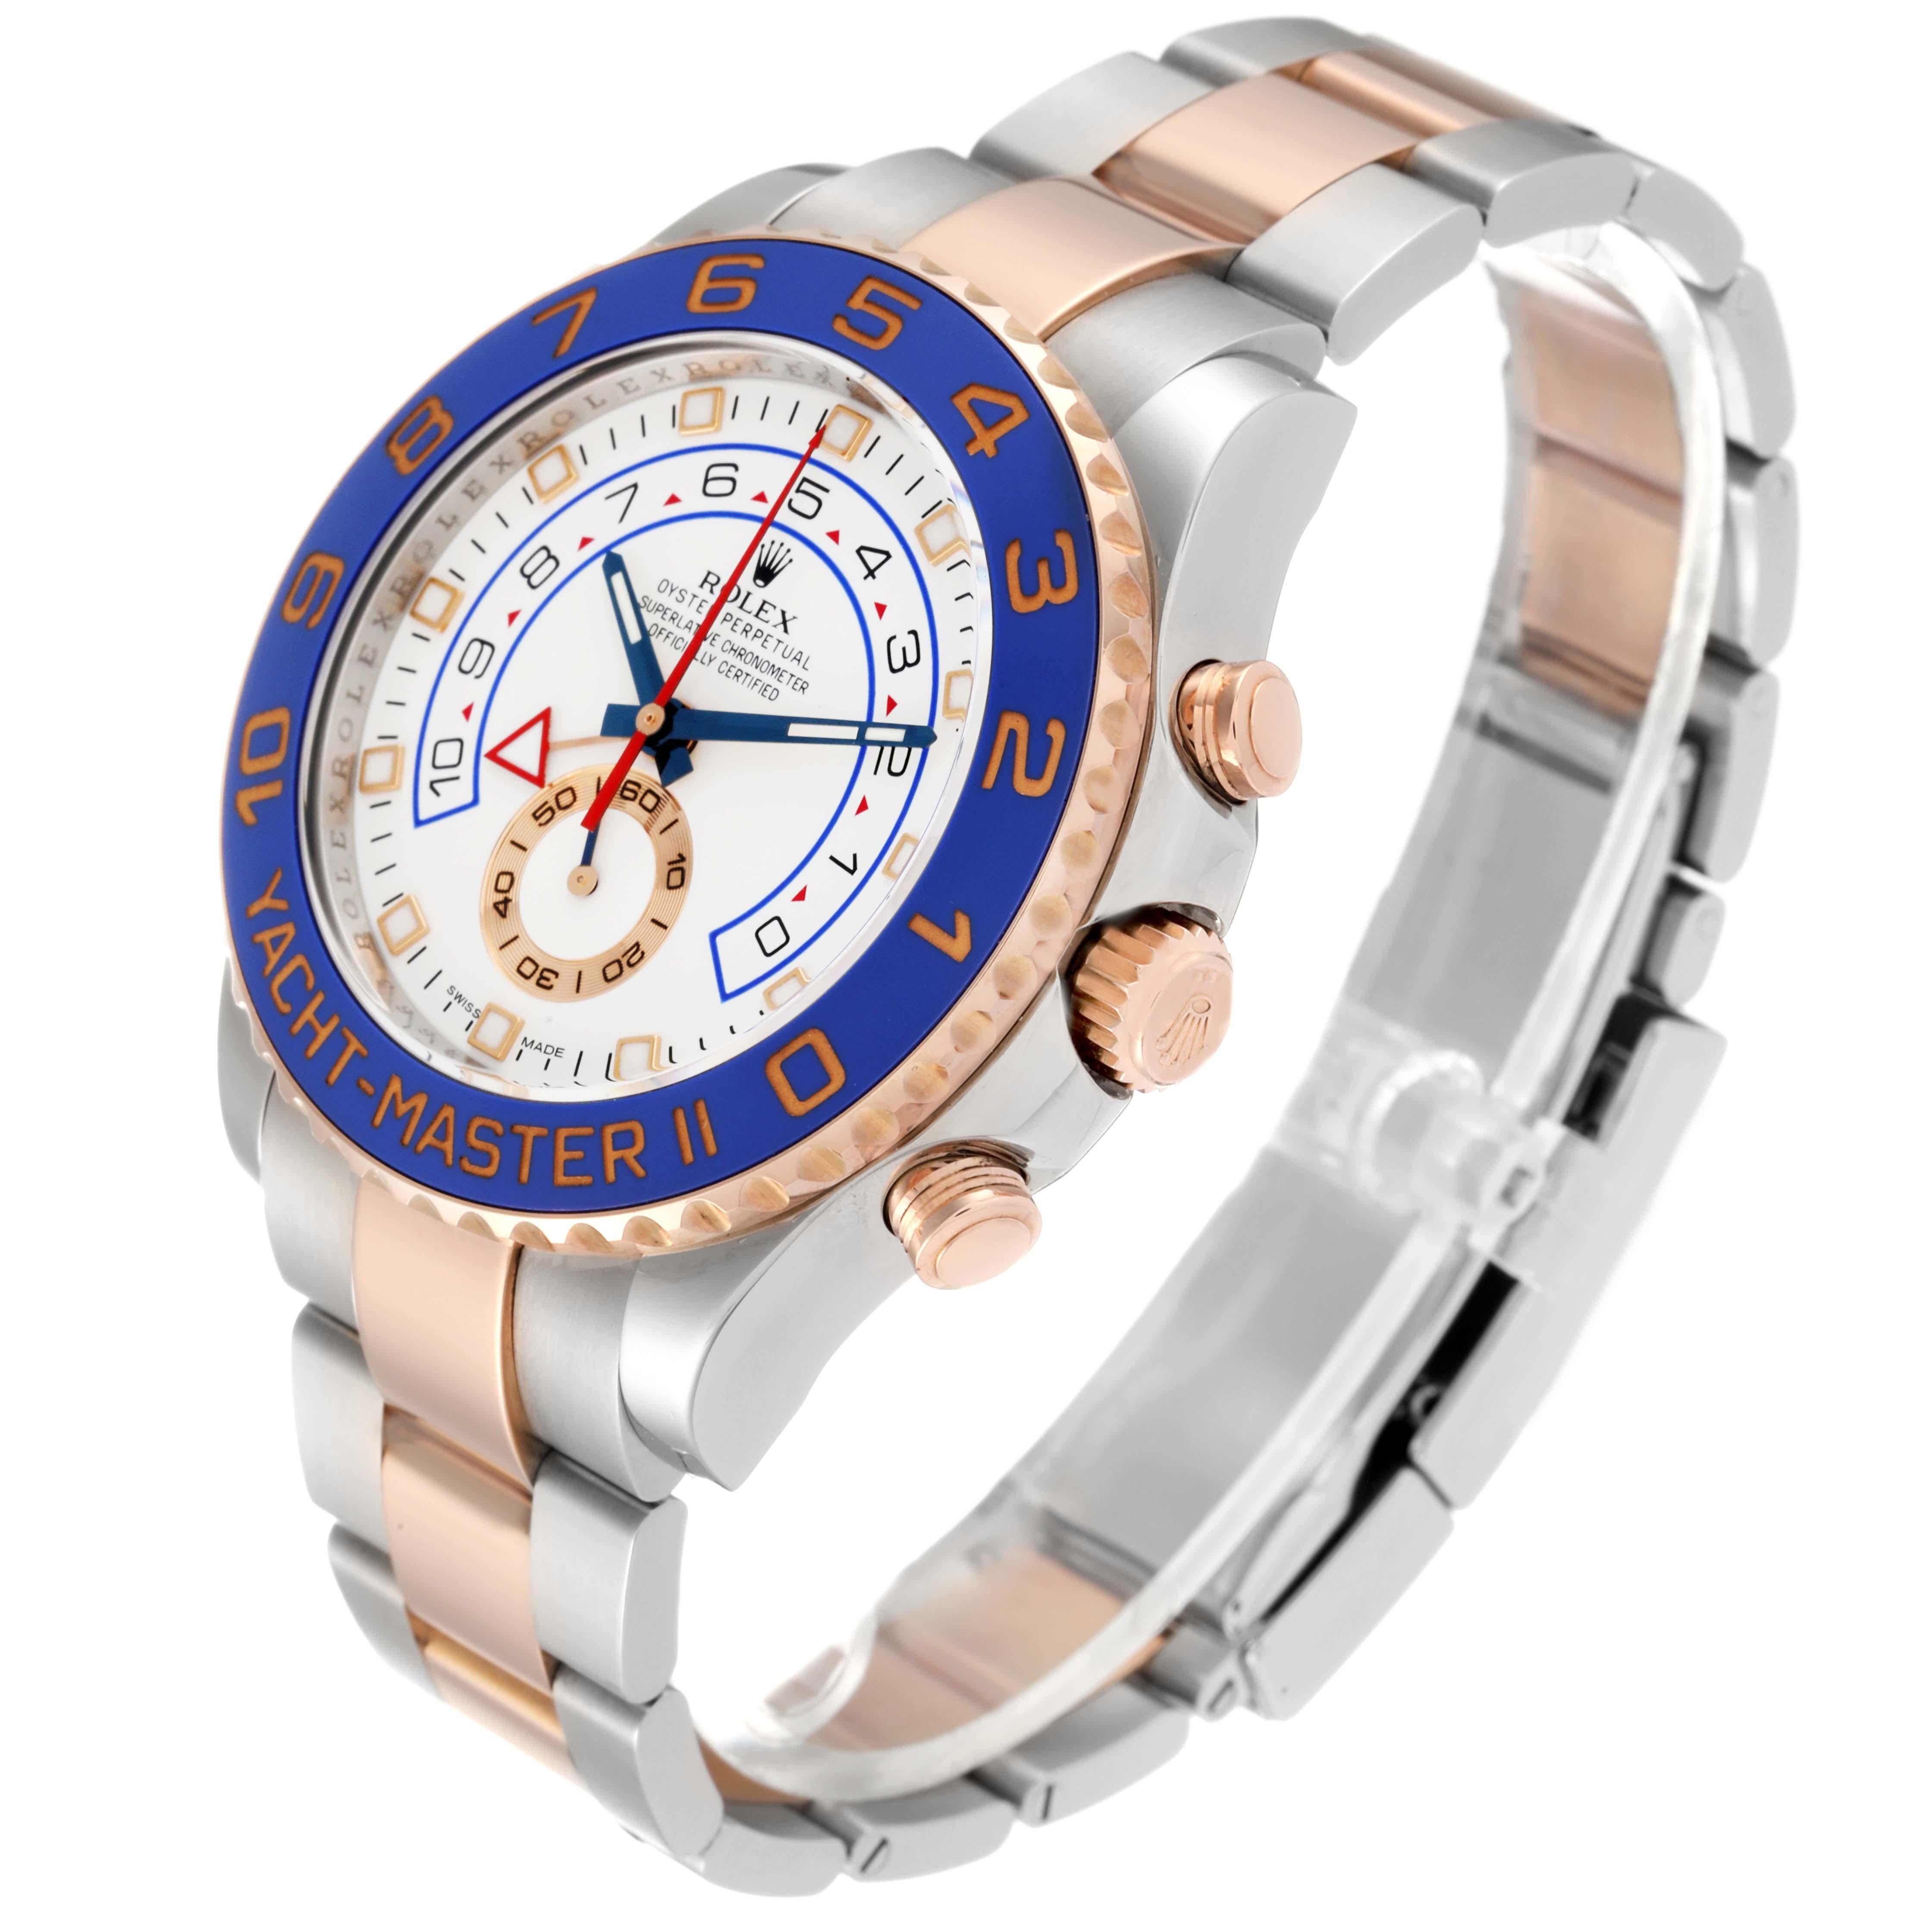 Men's Rolex Yachtmaster II Steel Rose Gold Mens Watch 116681 Box Card For Sale